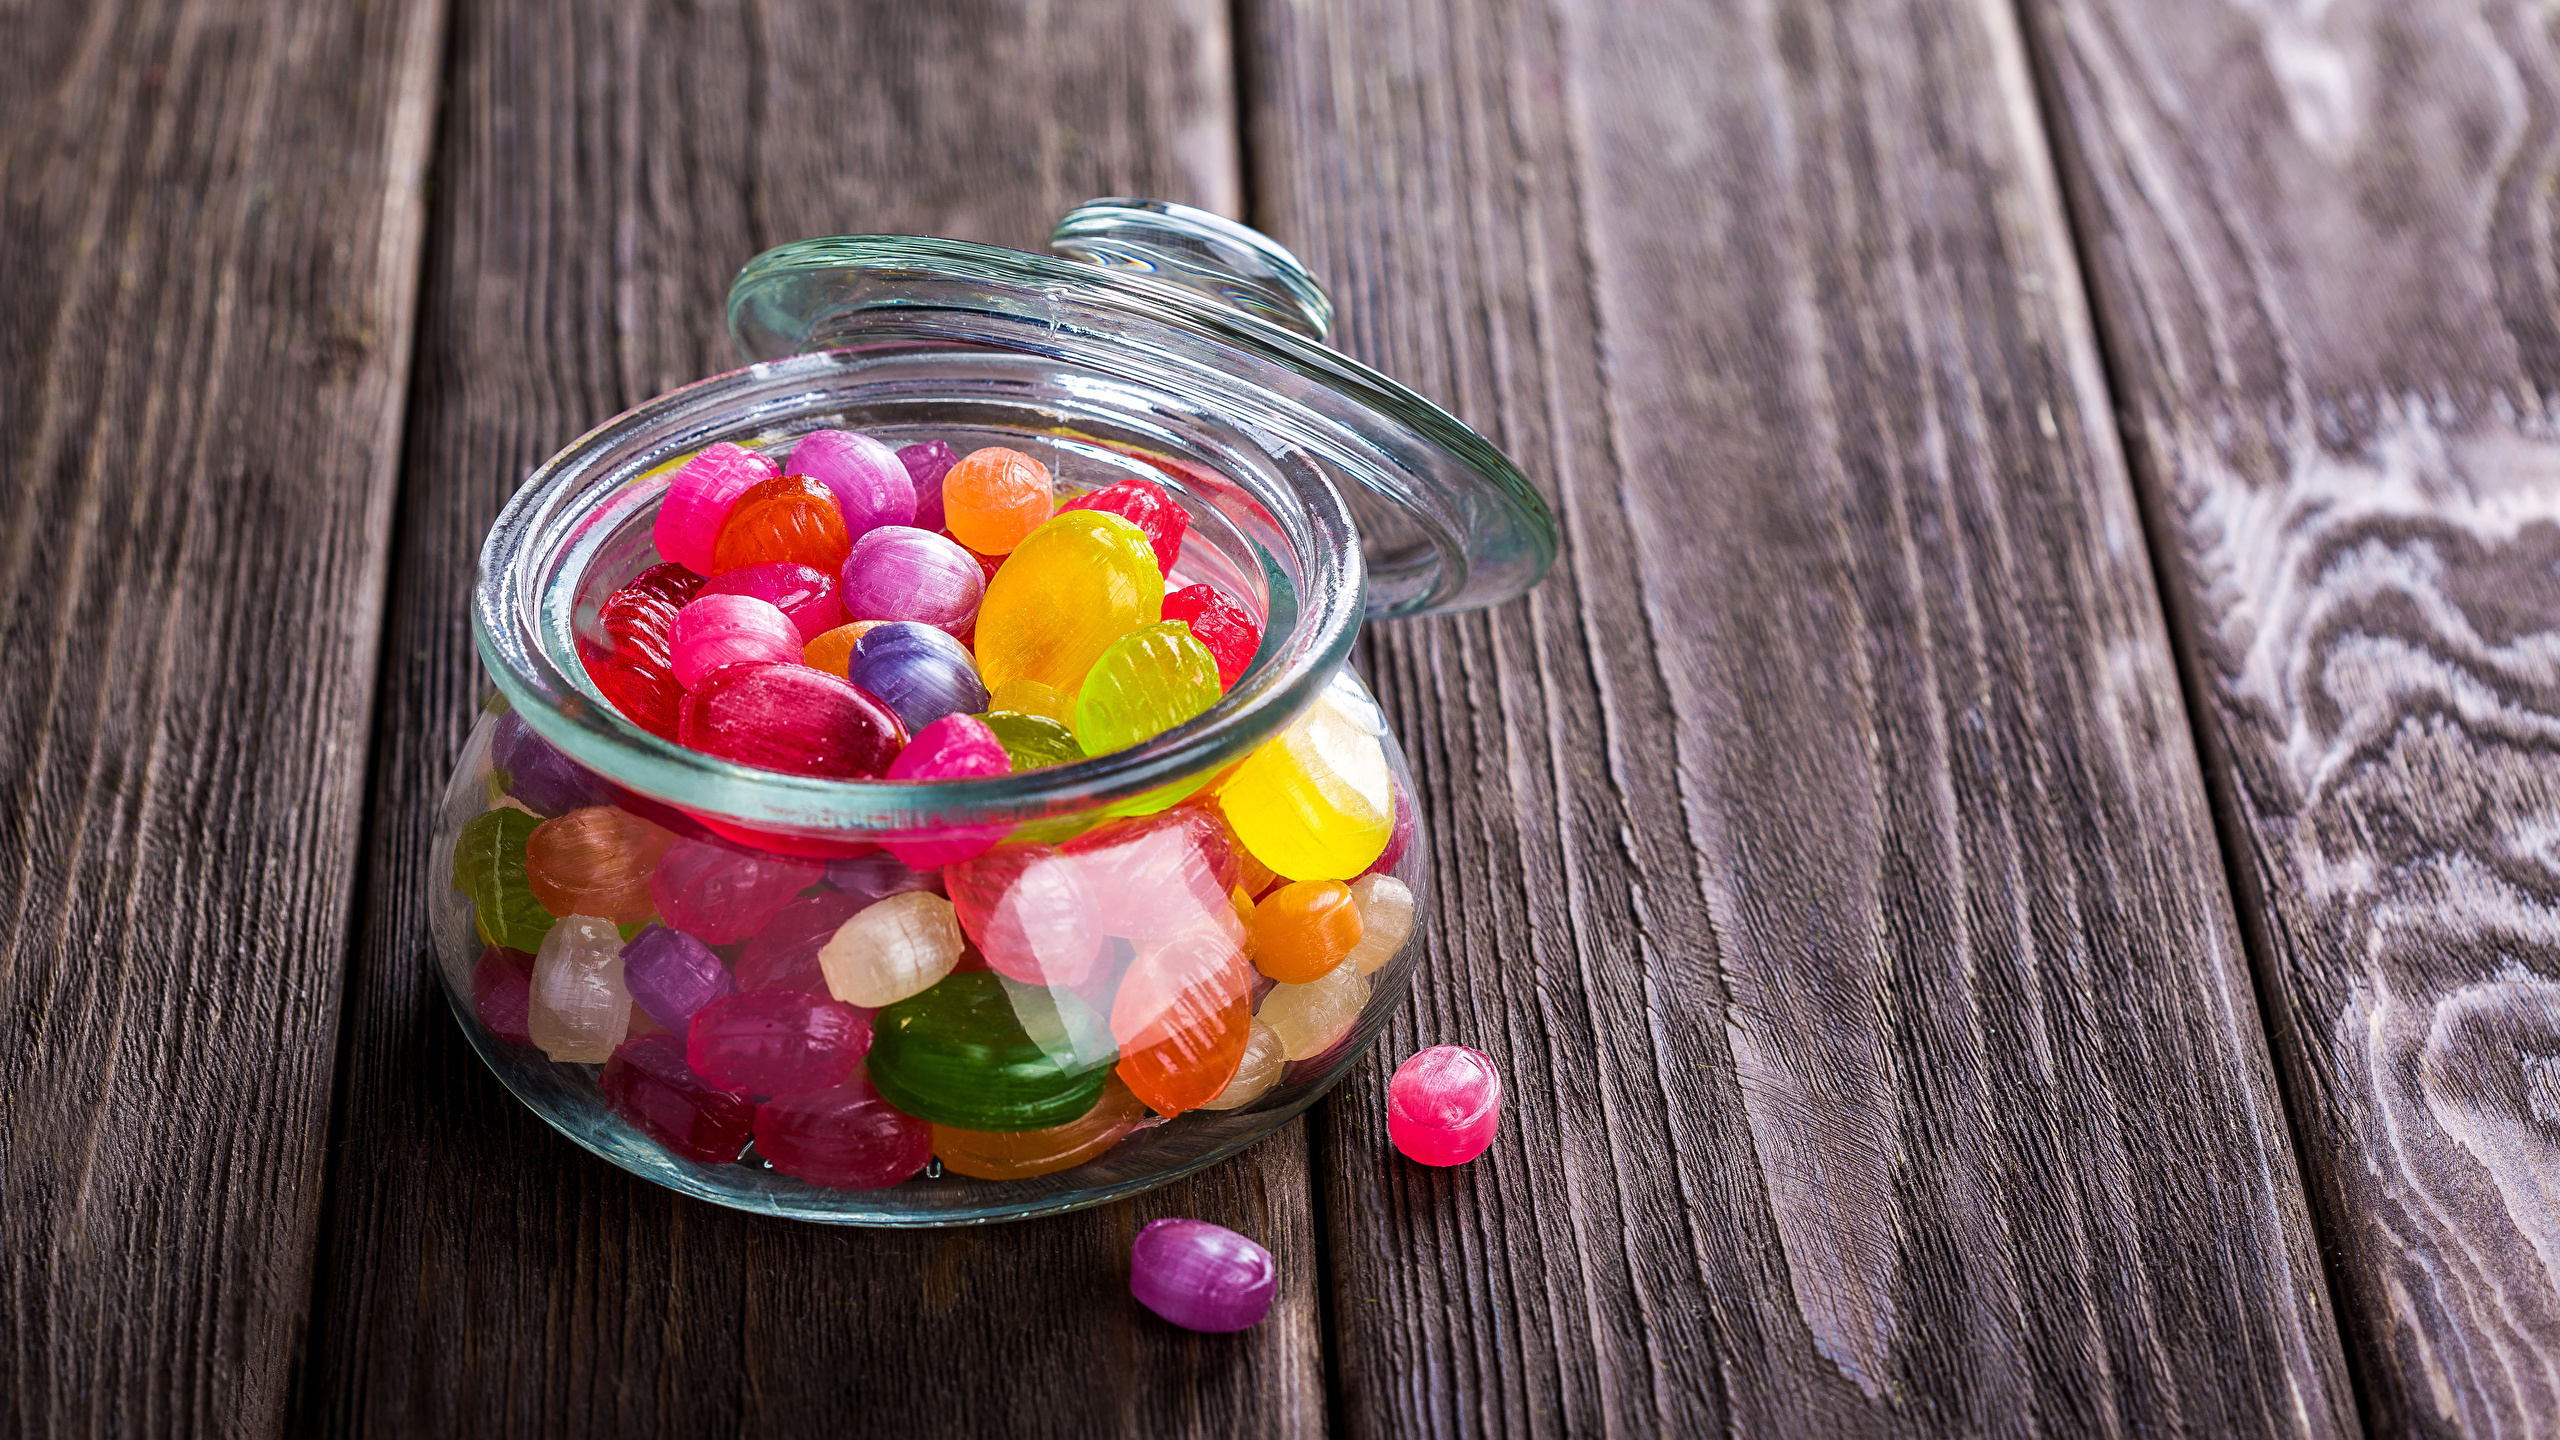 Candy Wallpaper - Colorful Candies In Jar - HD Wallpaper 